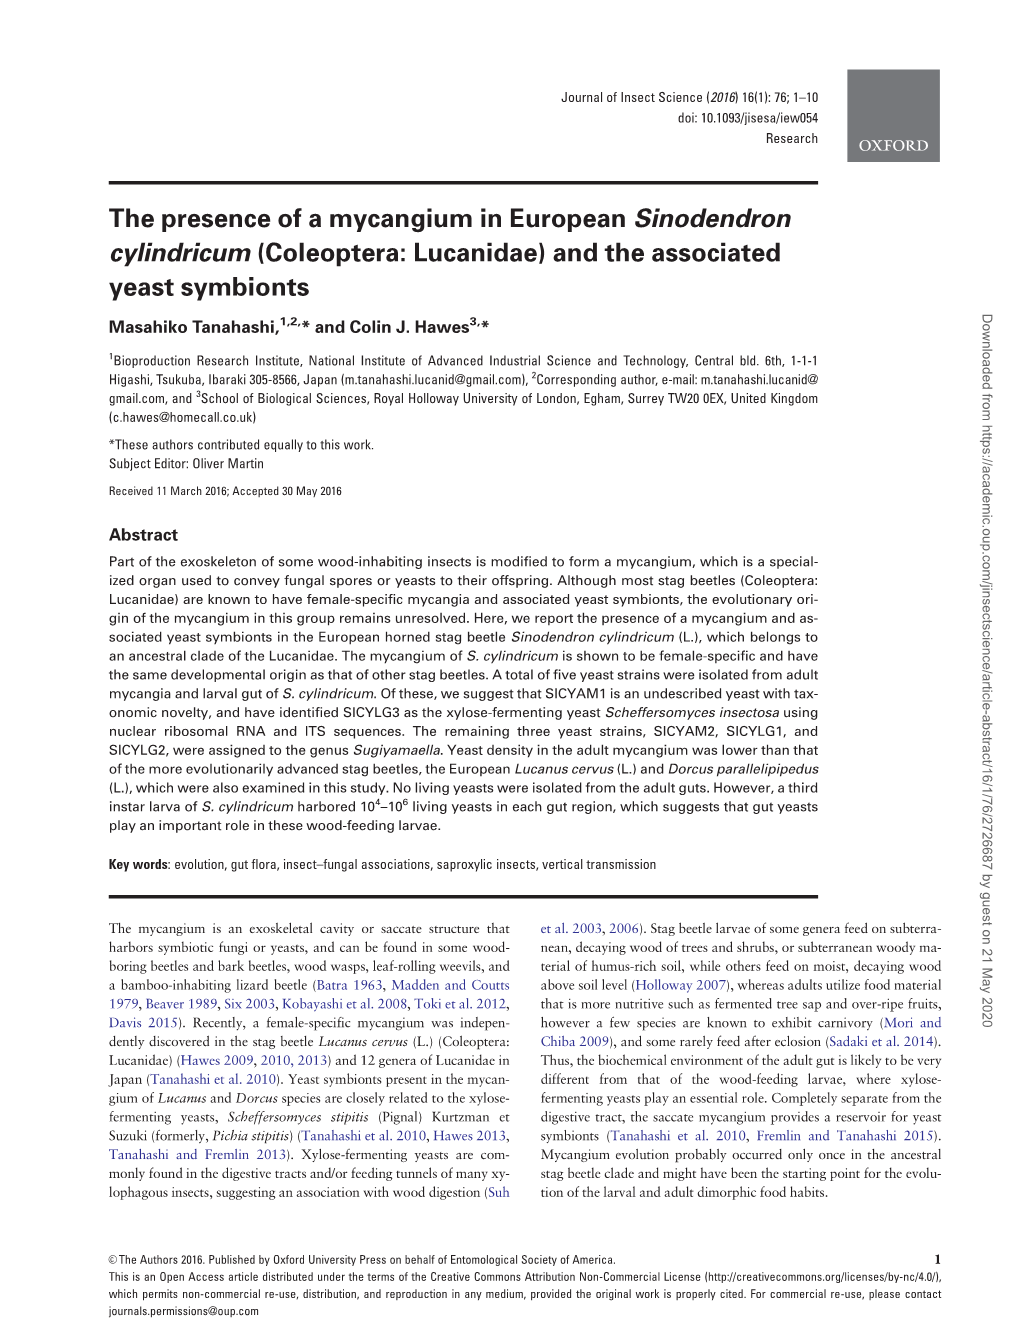 The Presence of a Mycangium in European Sinodendron